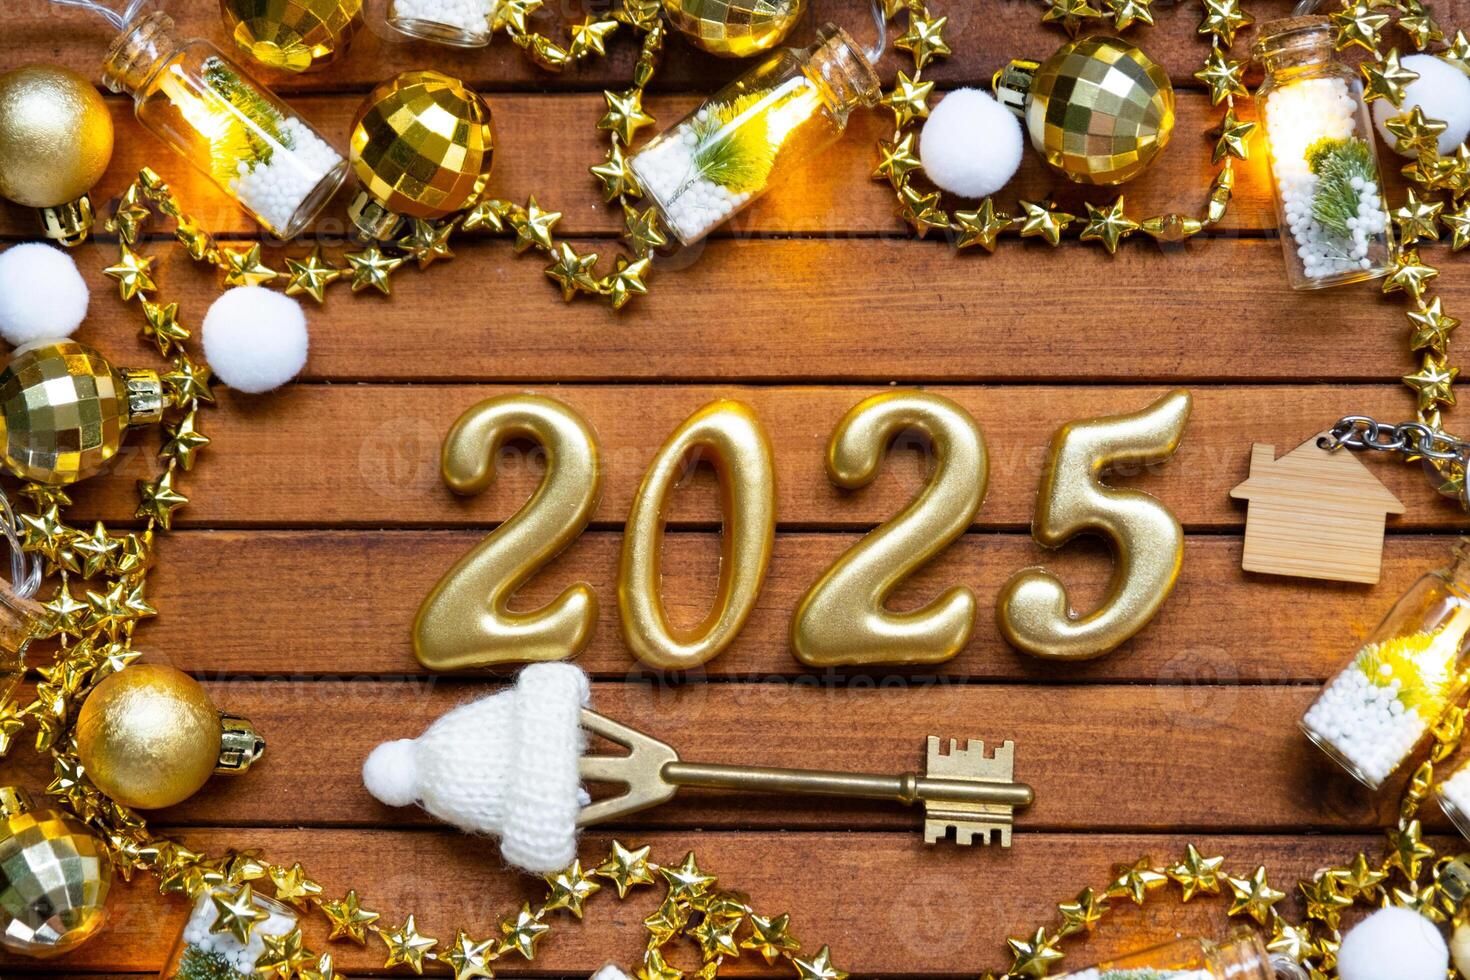 House key with tiny figure of home mock up on festive brown wooden background, lights of garlands. New Year 2025 wooden letters, greeting card. Purchase, construction, relocation, mortgage, insurance photo